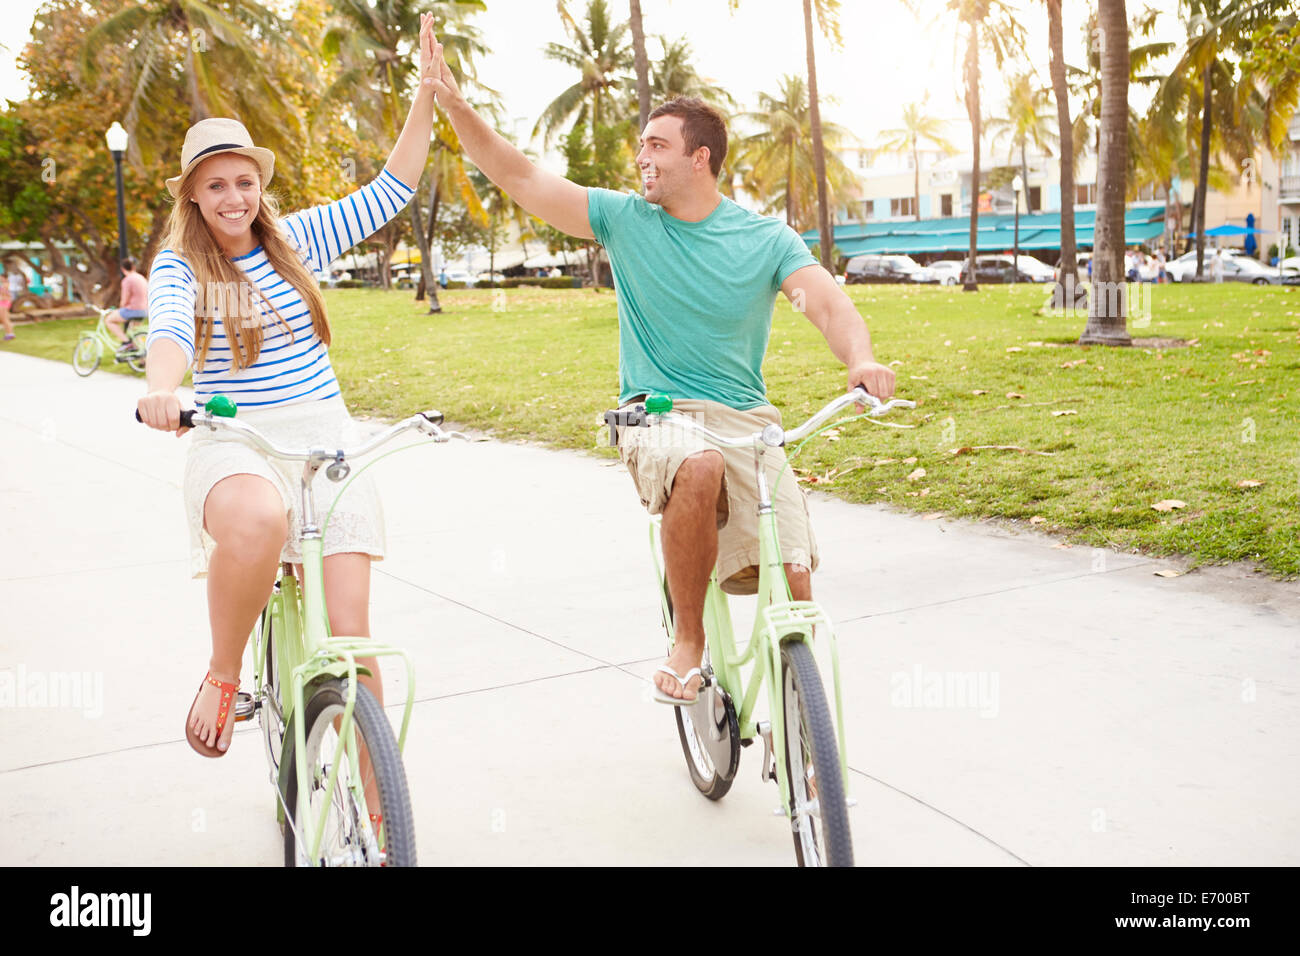 Young Couple Having Fun On Bicycle Ride Stock Photo